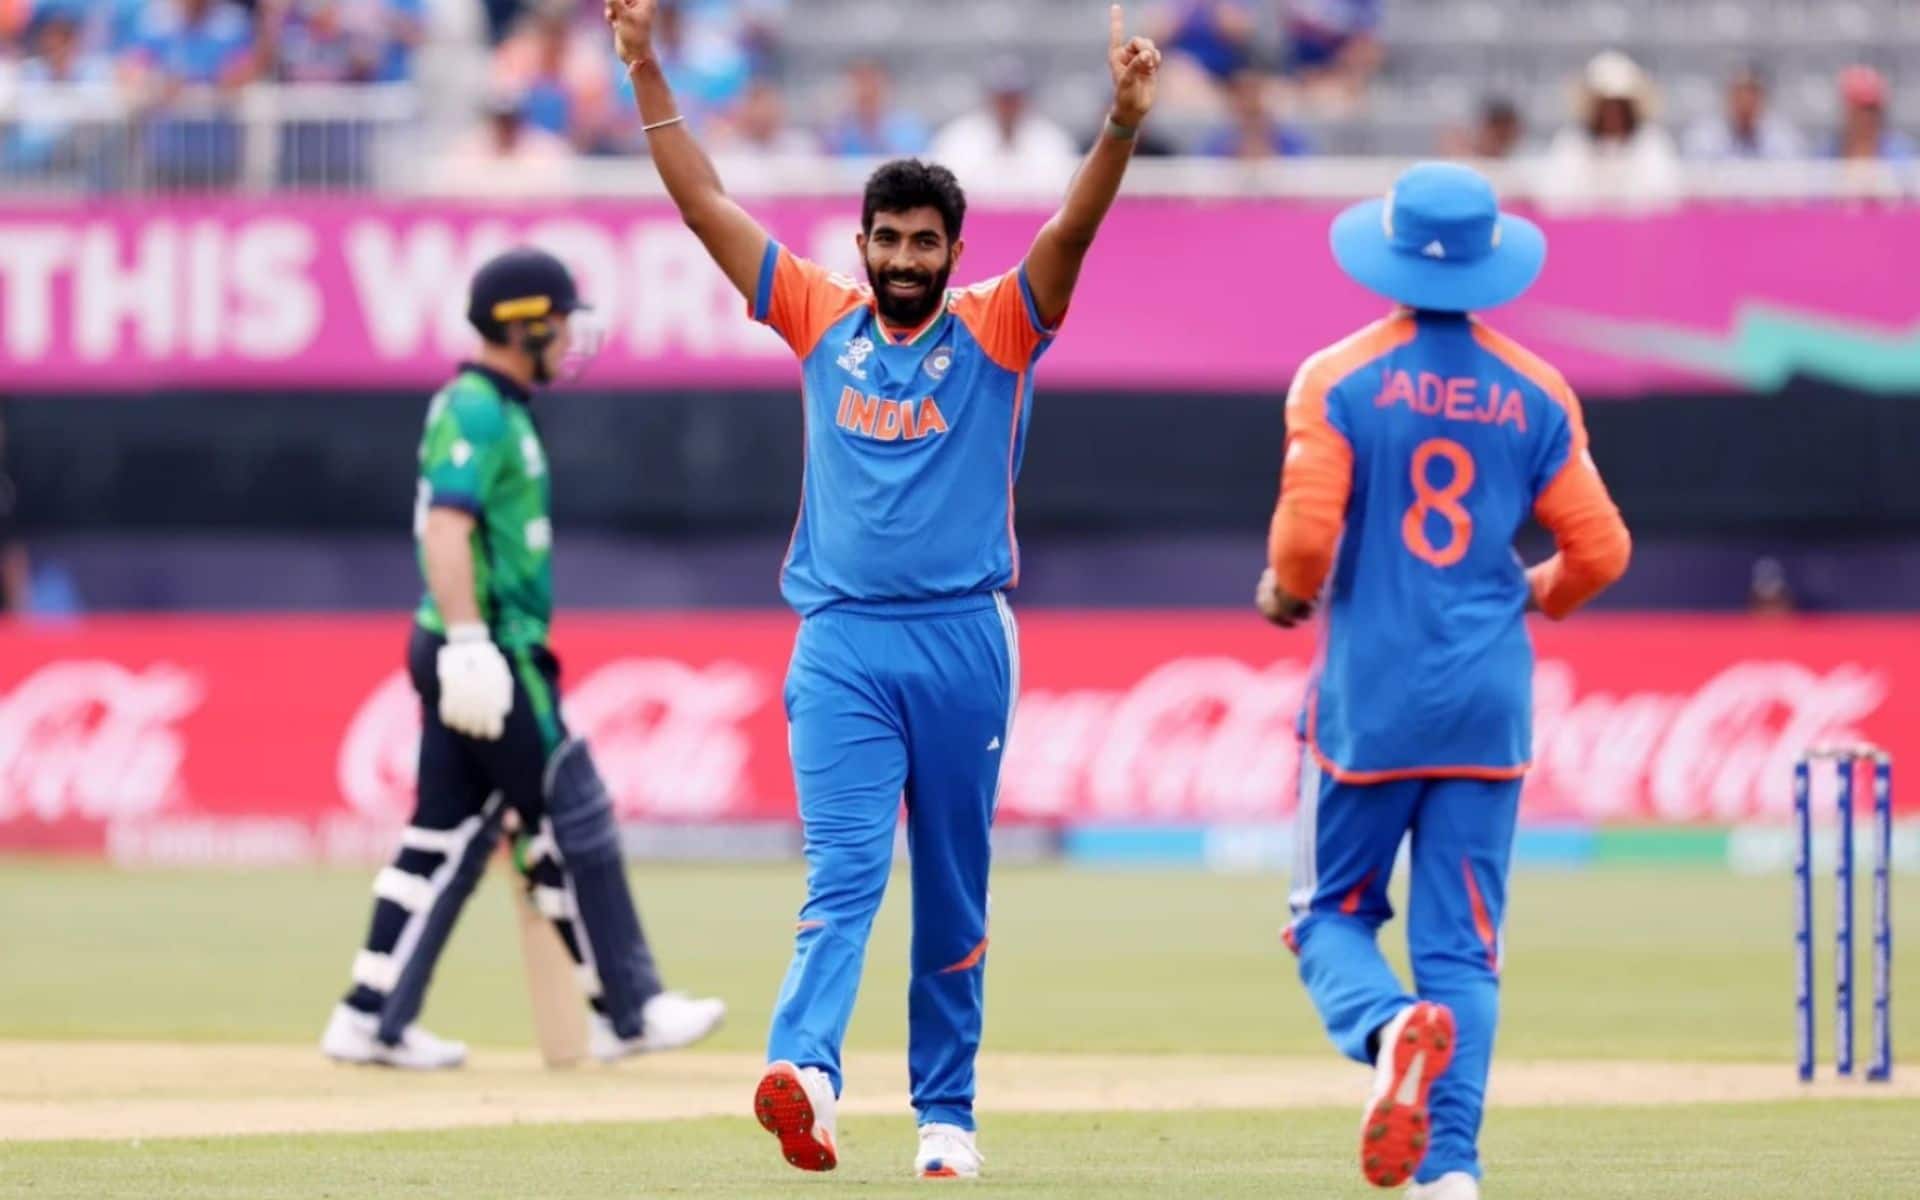 Jasprit Bumrah chipped in with two Irish wickets (x.com)